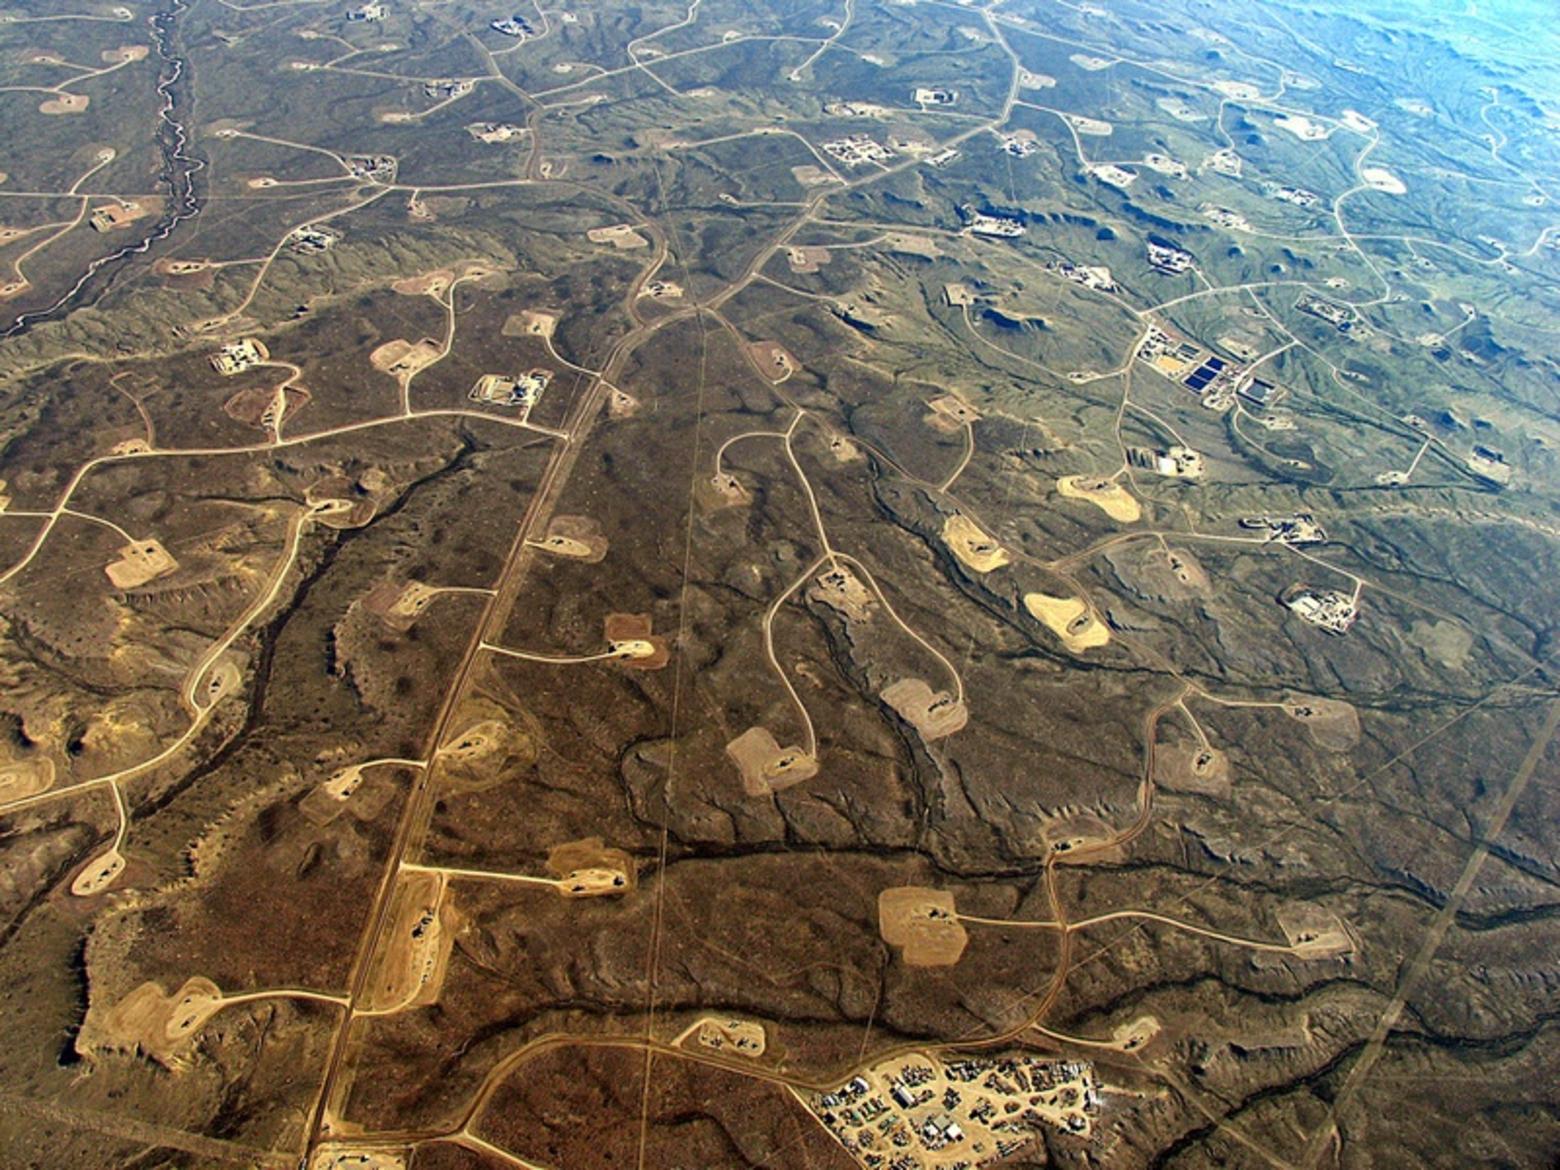 This is one glimpse of what full-field natural gas development, as permitted by the US Bureau of Land Management looks like. While allowed to proceed during the administration of George W Bush and its impacts decried, the Trump administration has instructed the BLM to greenlight energy development over vast sweeps so that America will allegedly achieve energy independence. Such intensive development like this is blamed in part for declines in mule deer populations and threats to greater sage-grouse nesting and breeding grounds. Photo courtesy Ecoflight (ecoflight.org) 